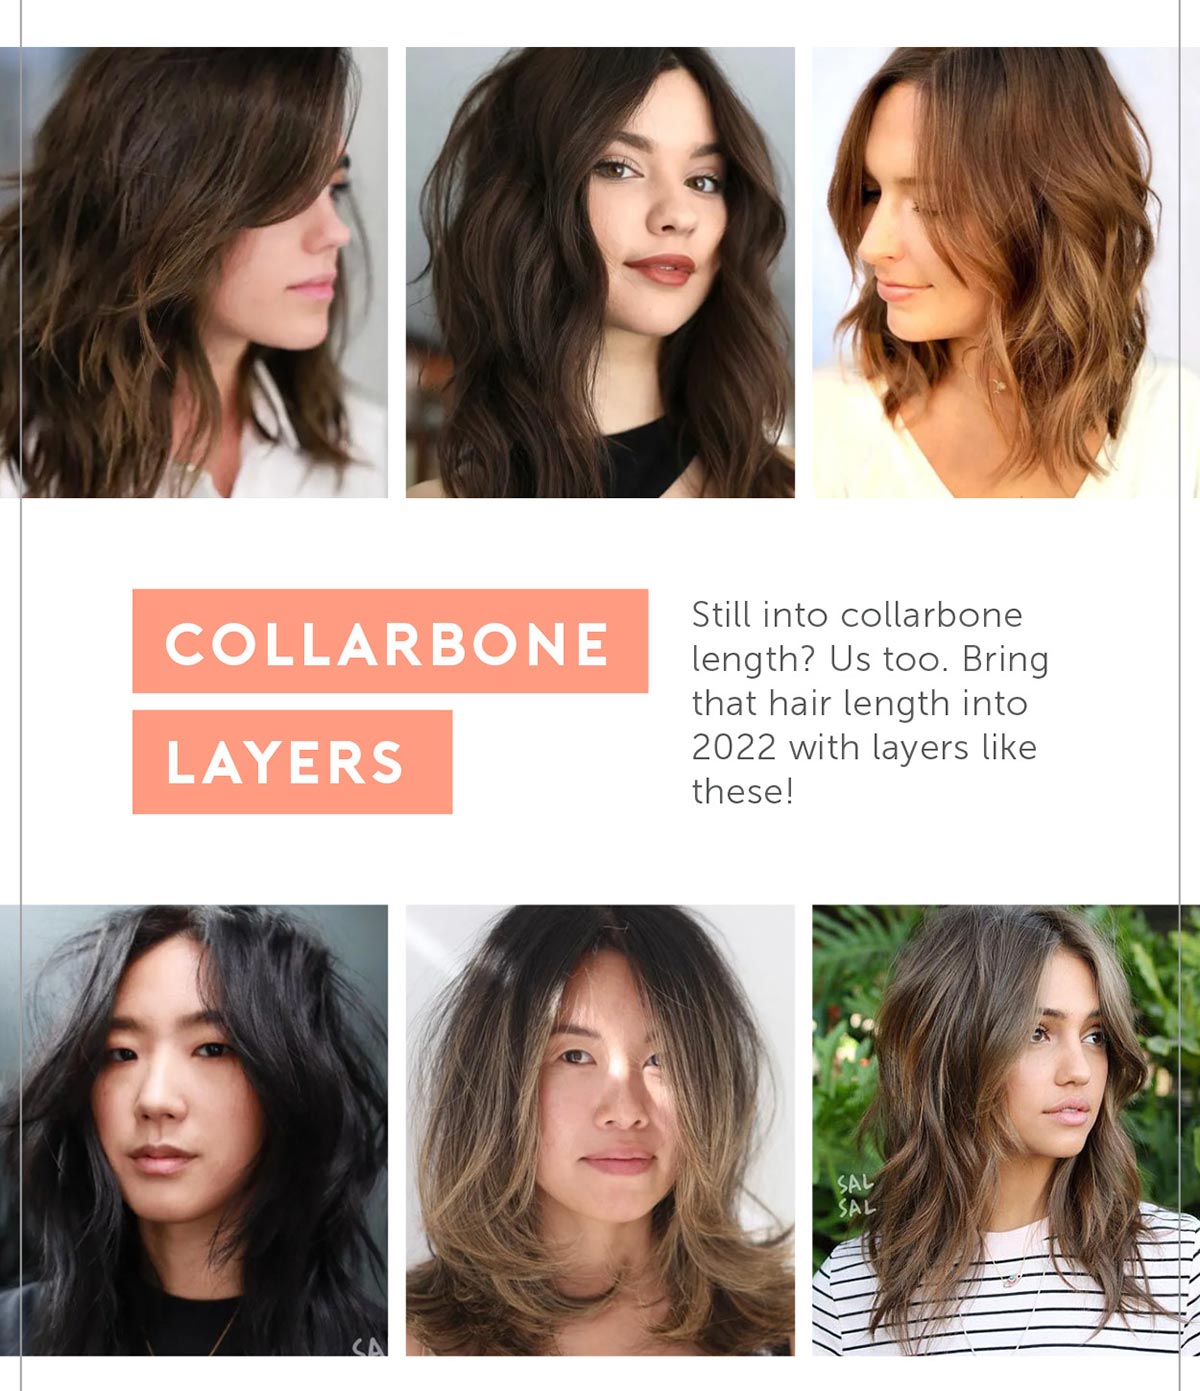 1. Collarbone layers Still into collarbone length? Us too. Bring that hair length into 2022 with layers like these!